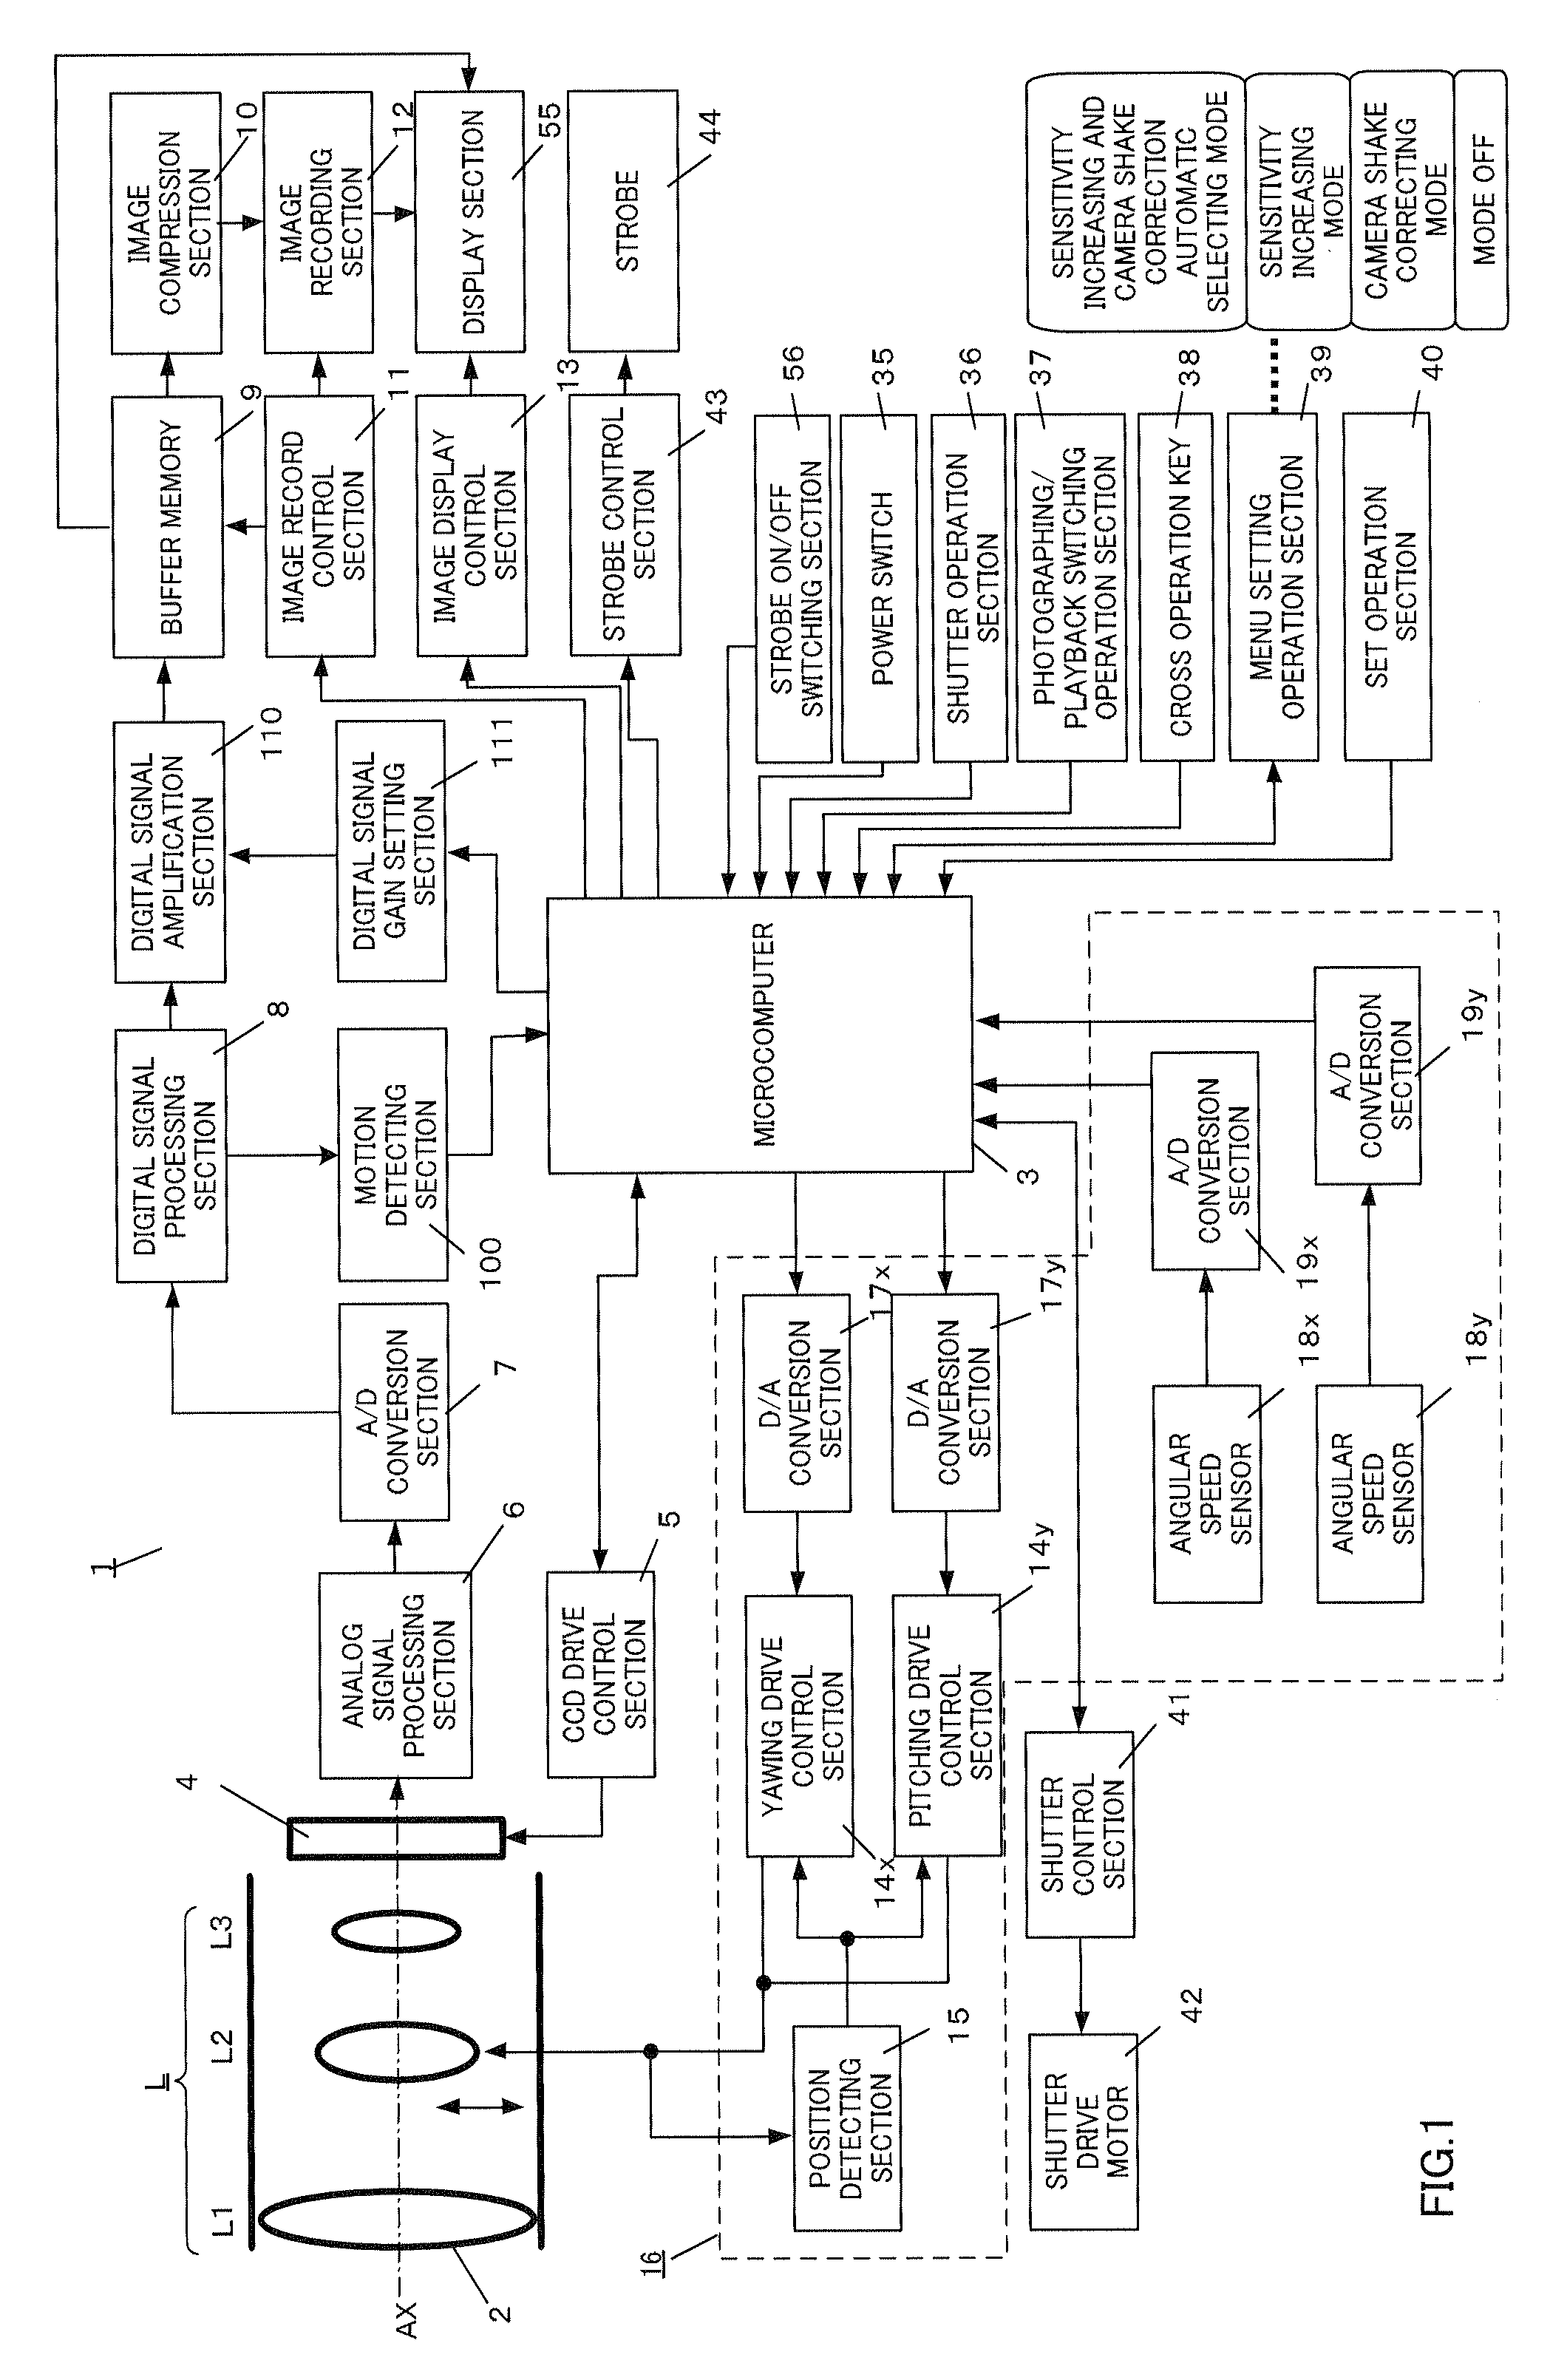 Image pickup apparatus to control an exposure time based on motion of a detected optical image